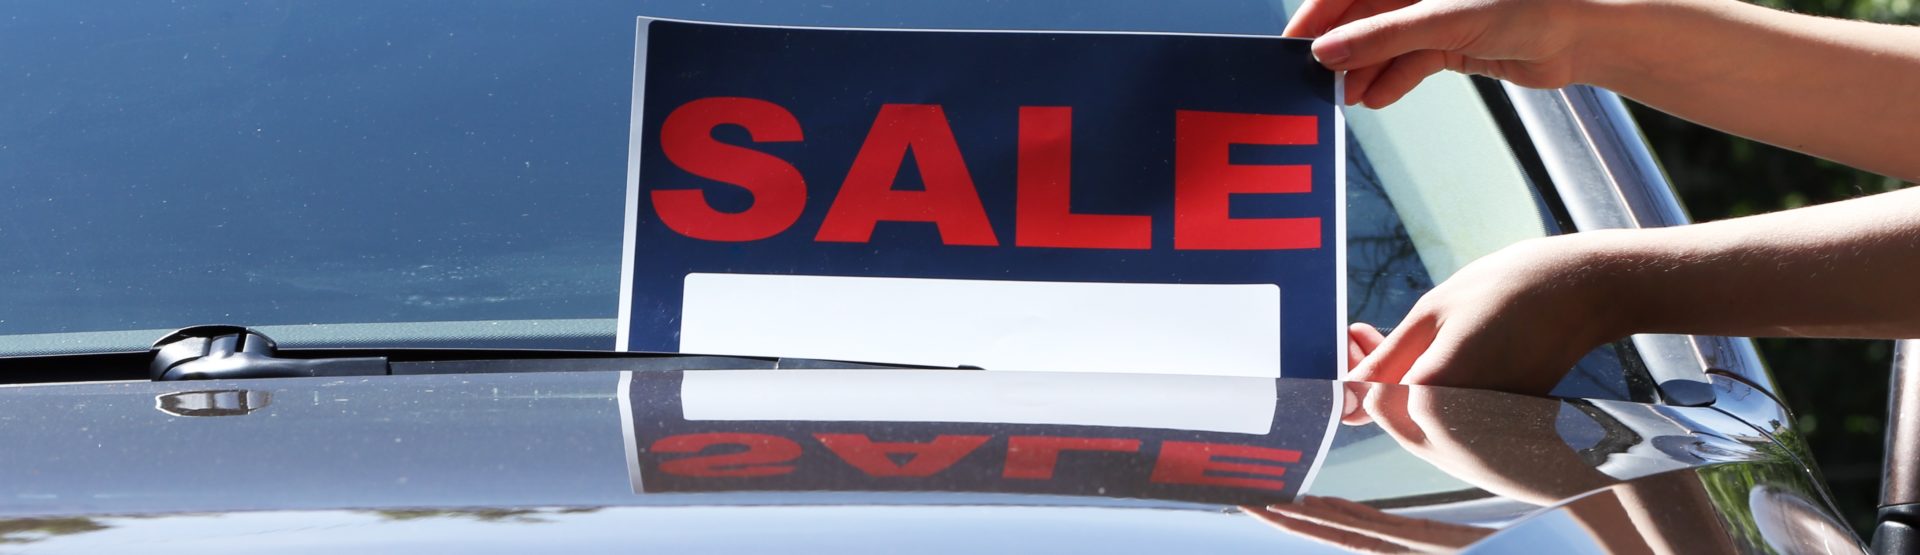 Inflated used car prices leaves small dealerships struggling to buy stock